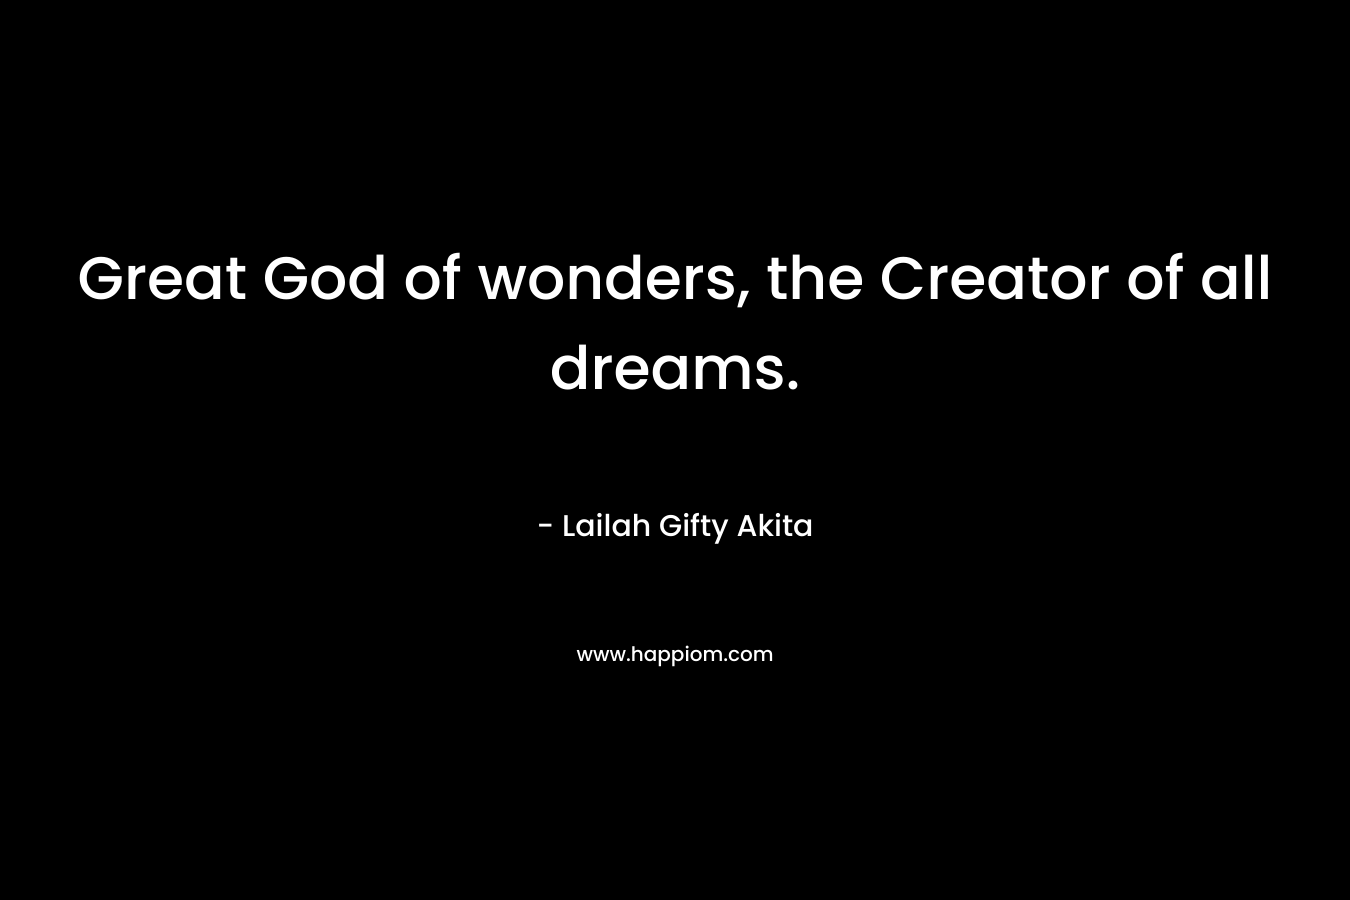 Great God of wonders, the Creator of all dreams.